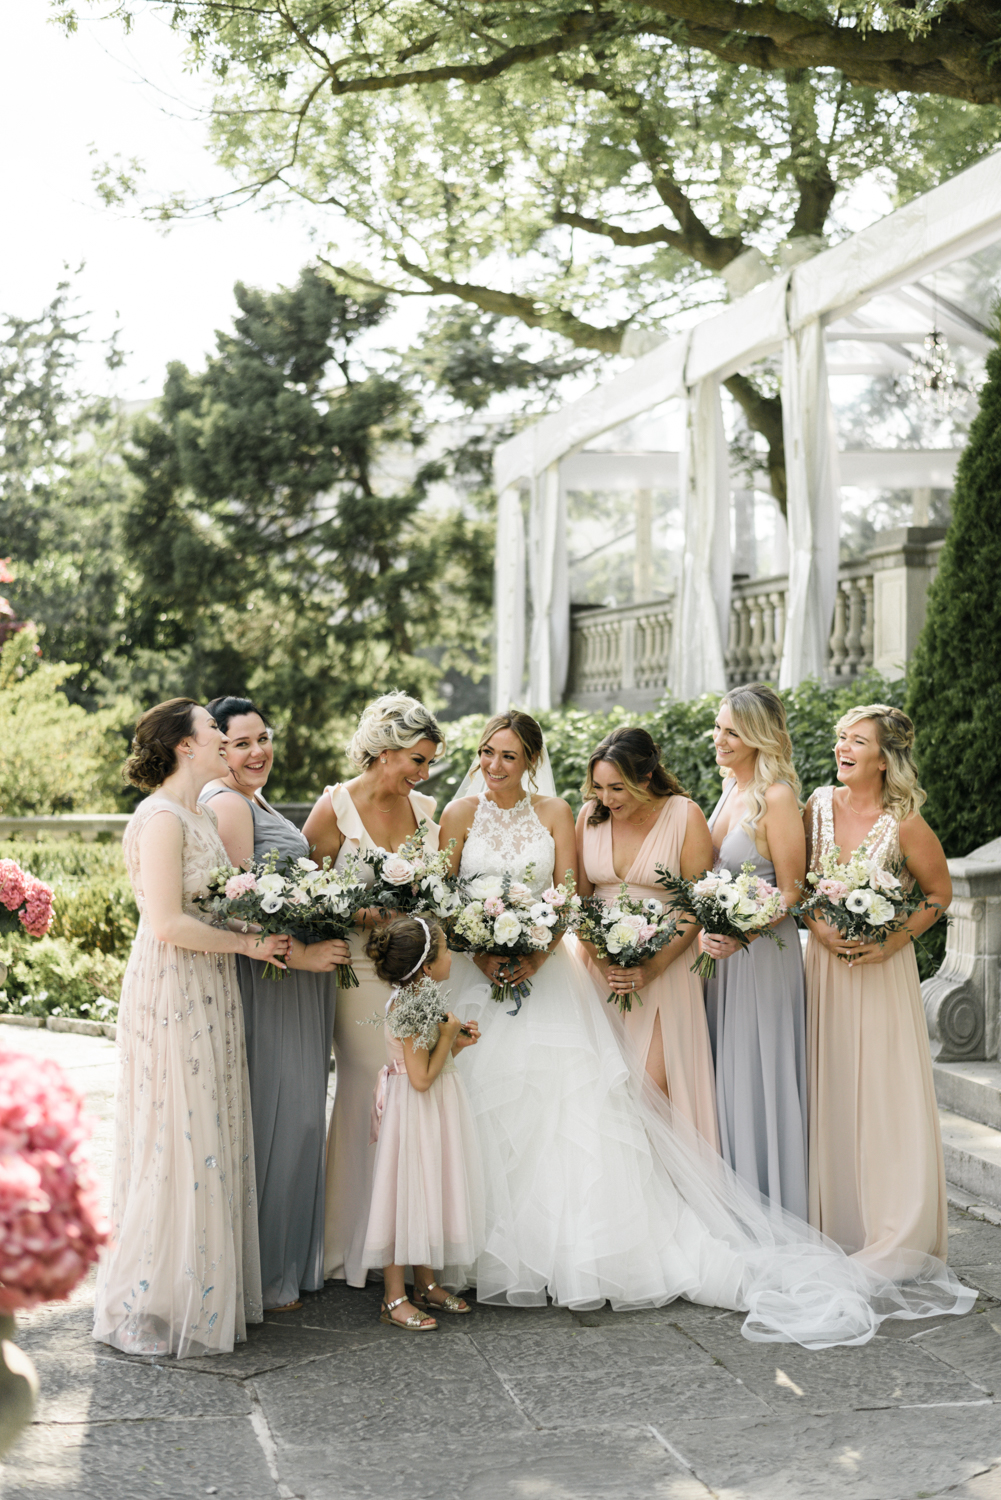 The prettiest bridesmaids in soft pastels at Graydon Hall